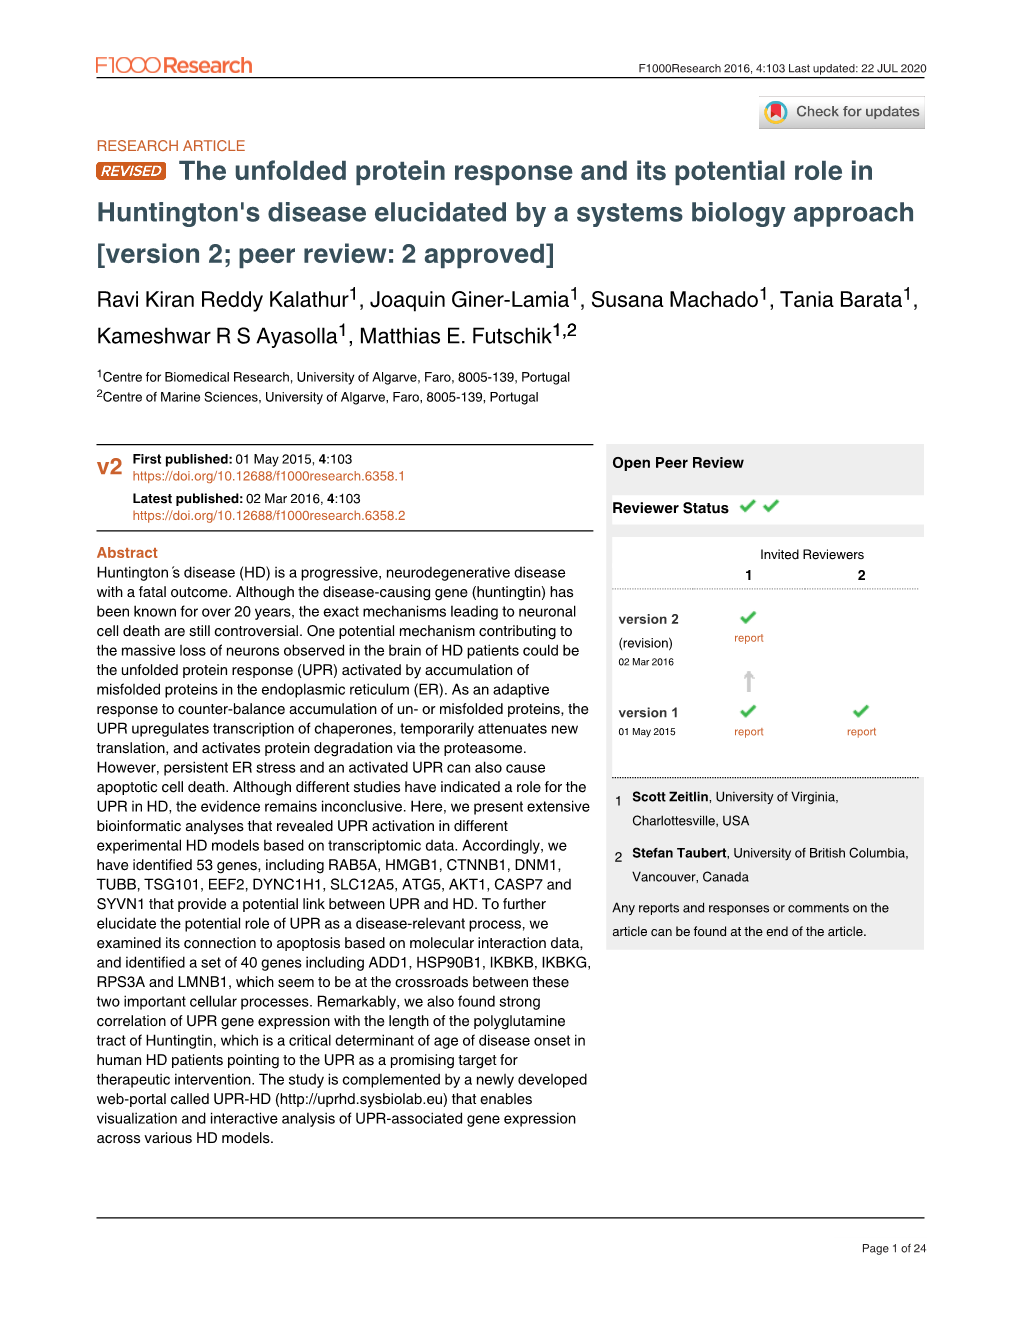 The Unfolded Protein Response and Its Potential Role In